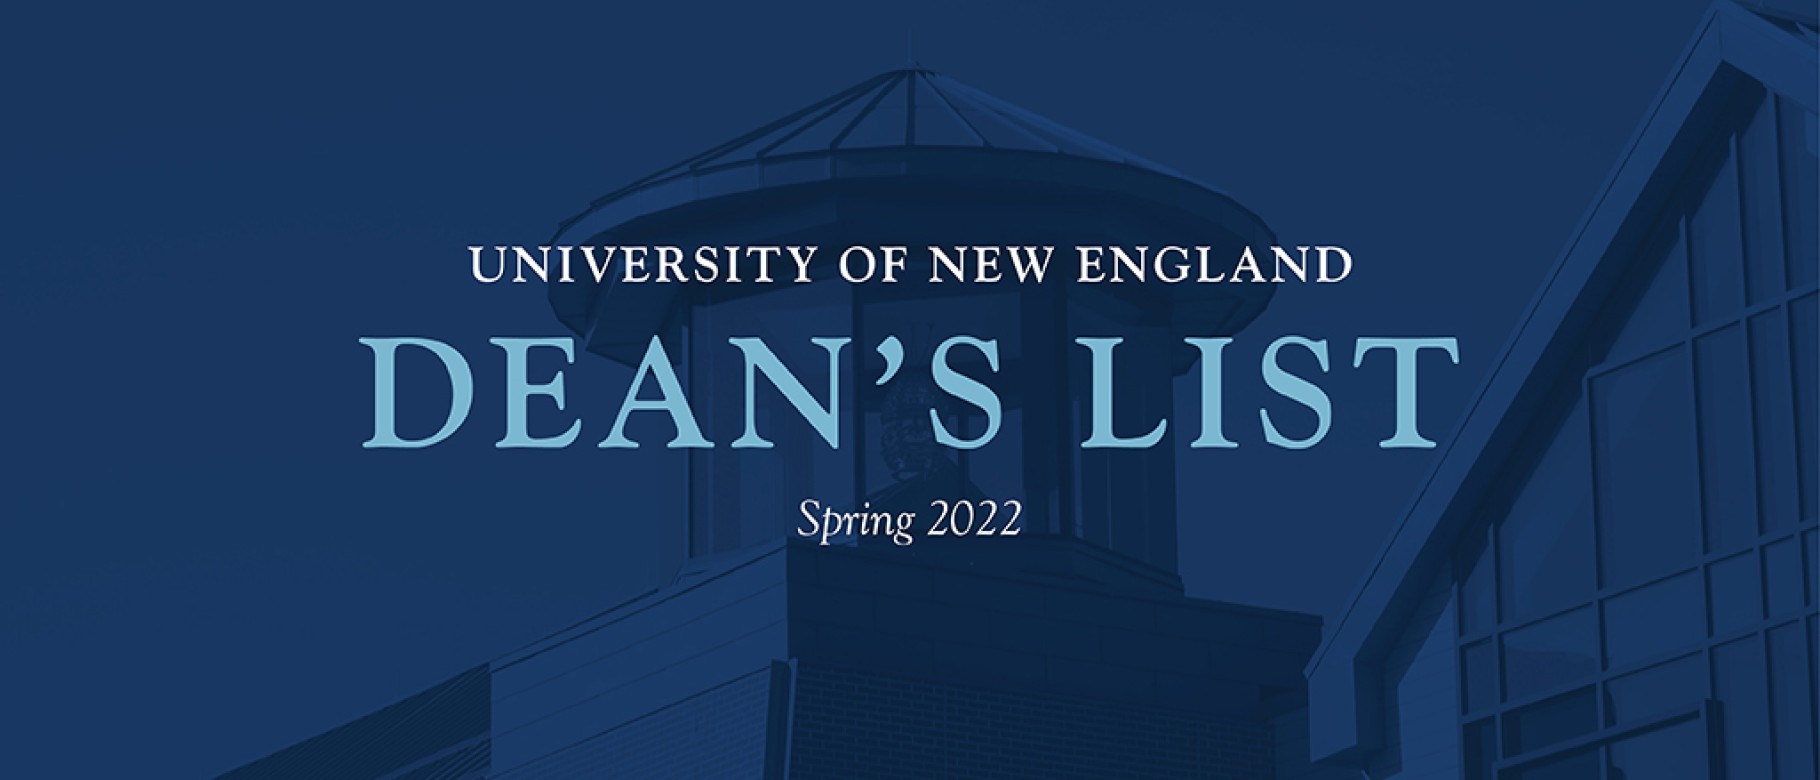 Graphic of Ripich Commons with blue overlay and words saying "University of New England Dean's List" Spring 2022